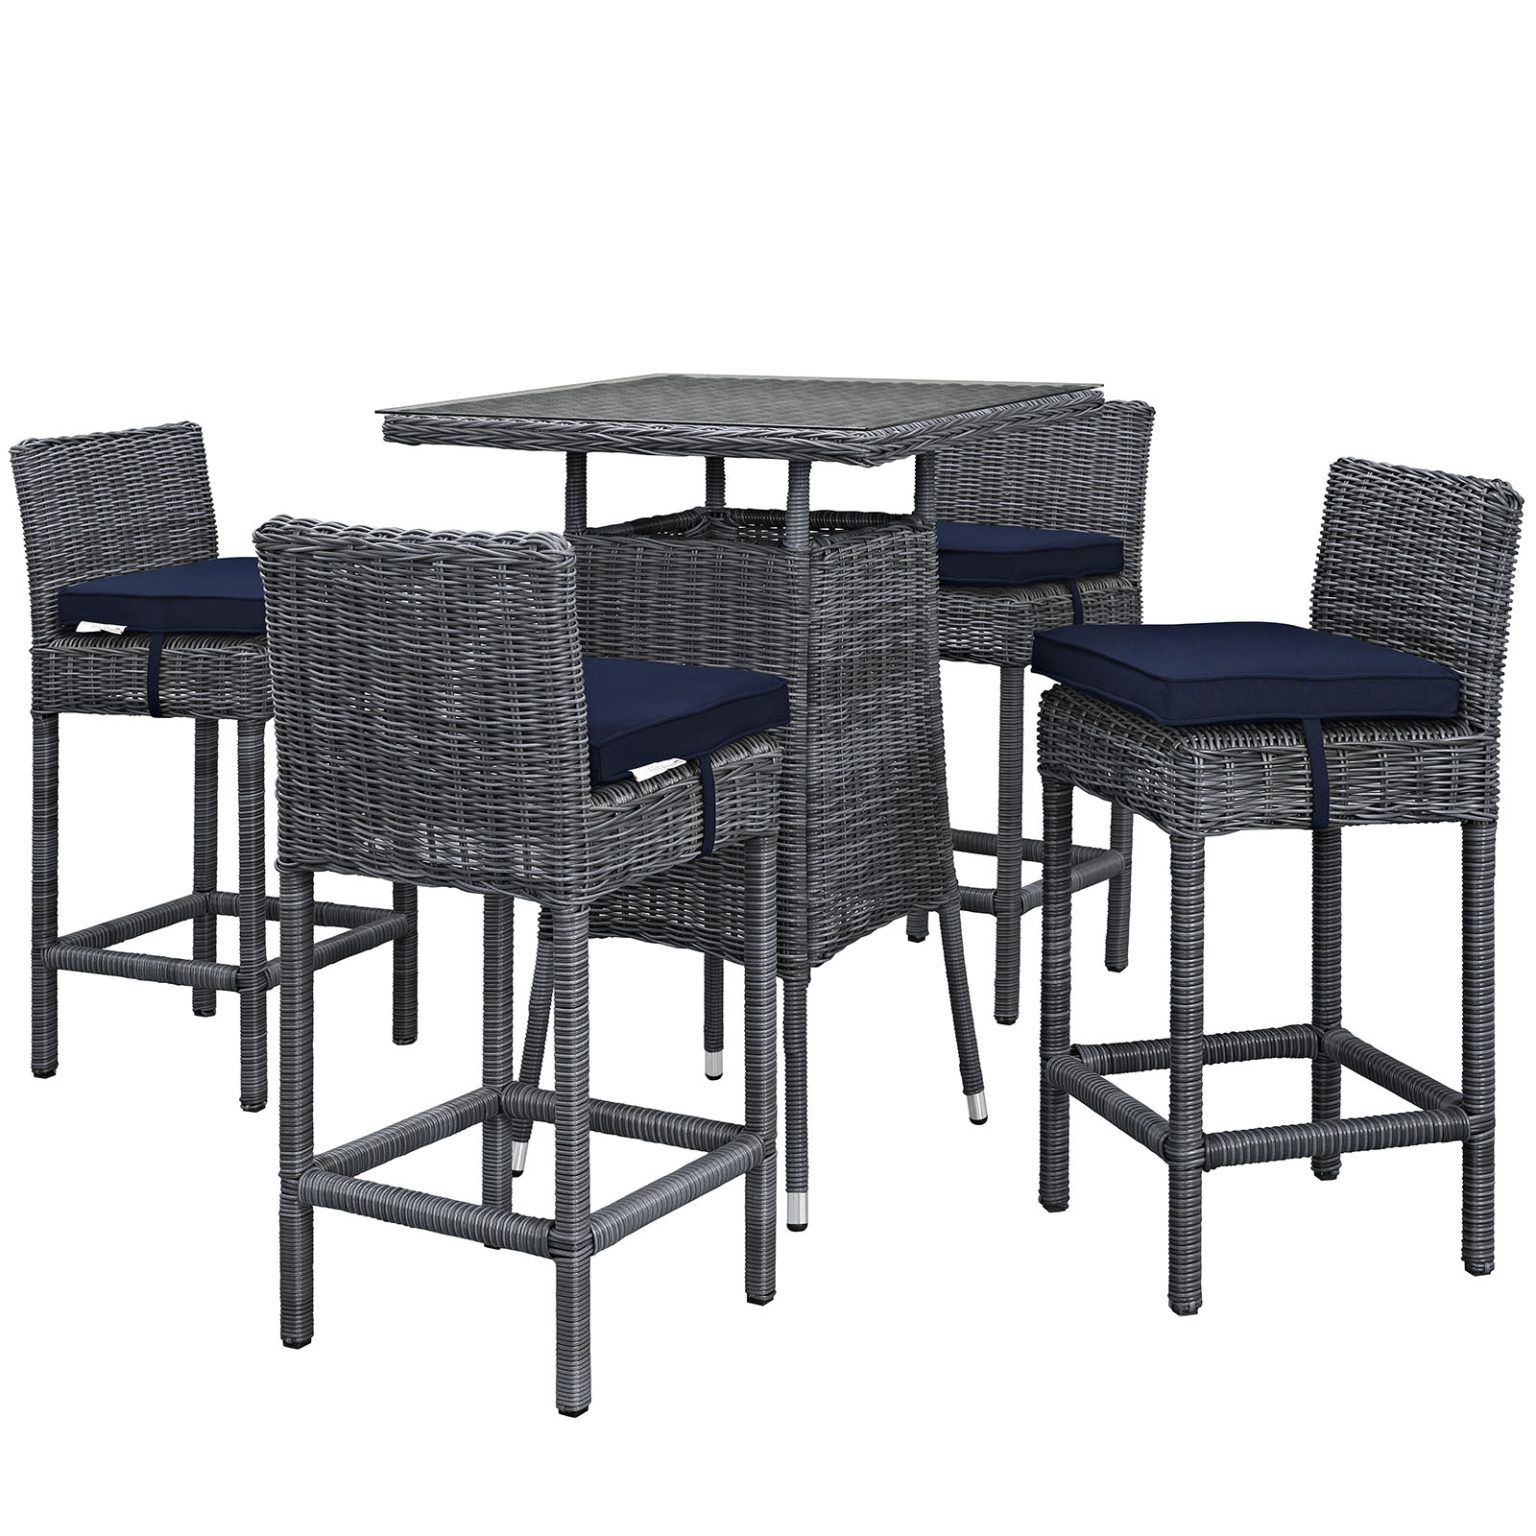 Summon 5 Piece Outdoor Patio Sunbrella® Pub Set In Canvas Navy – Hyme Throughout Current 5 Piece Outdoor Bar Tables (View 11 of 15)